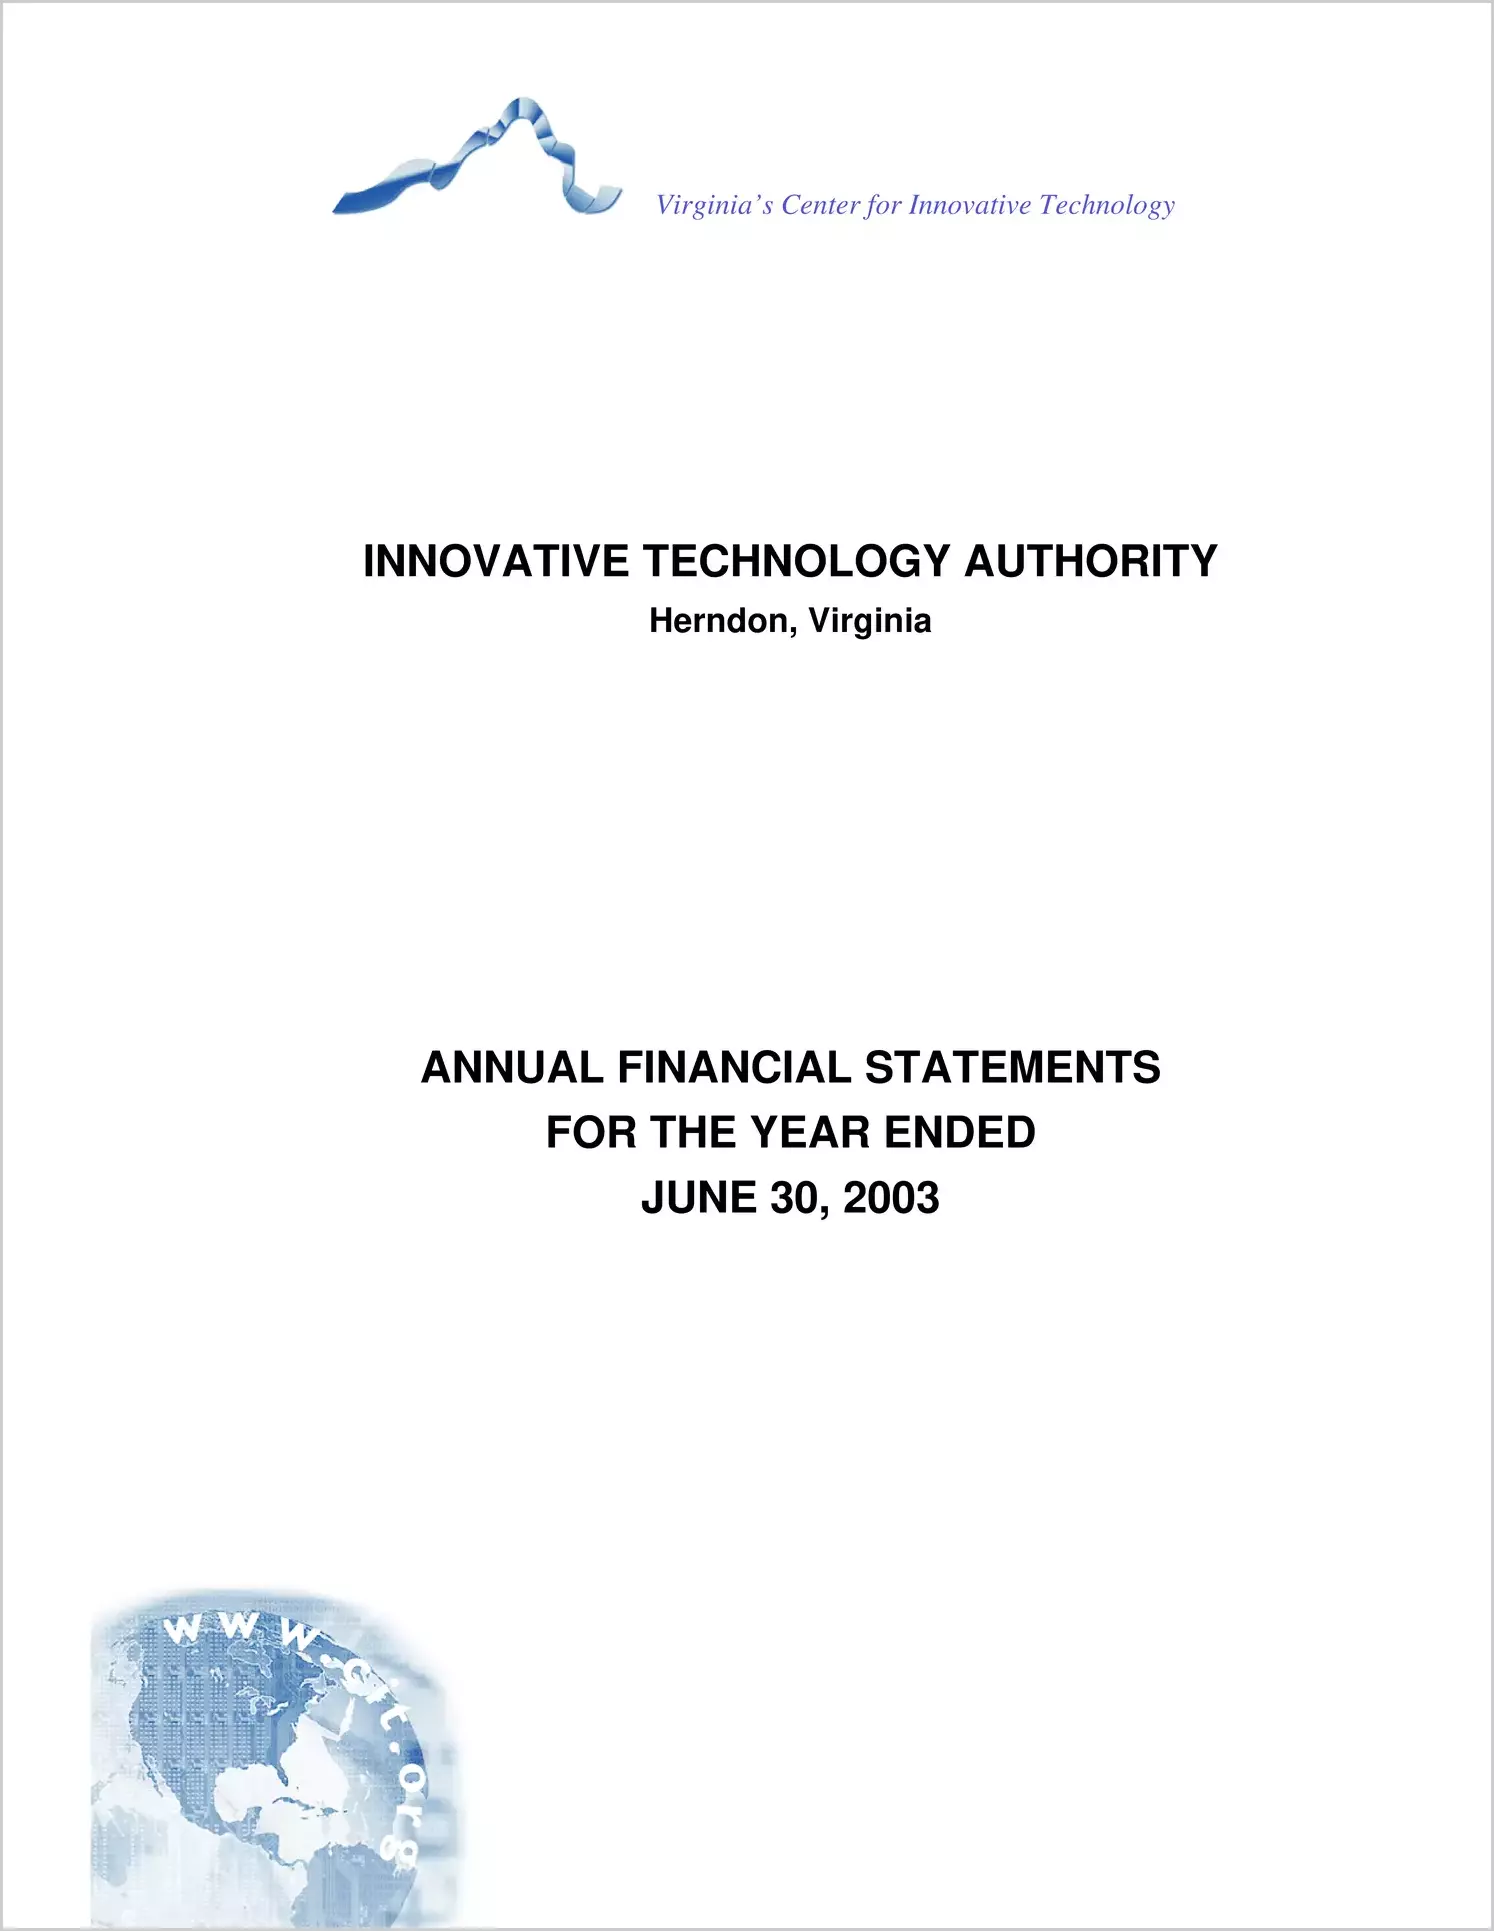 Innovative Technology Authority for the year ended June 30, 2003